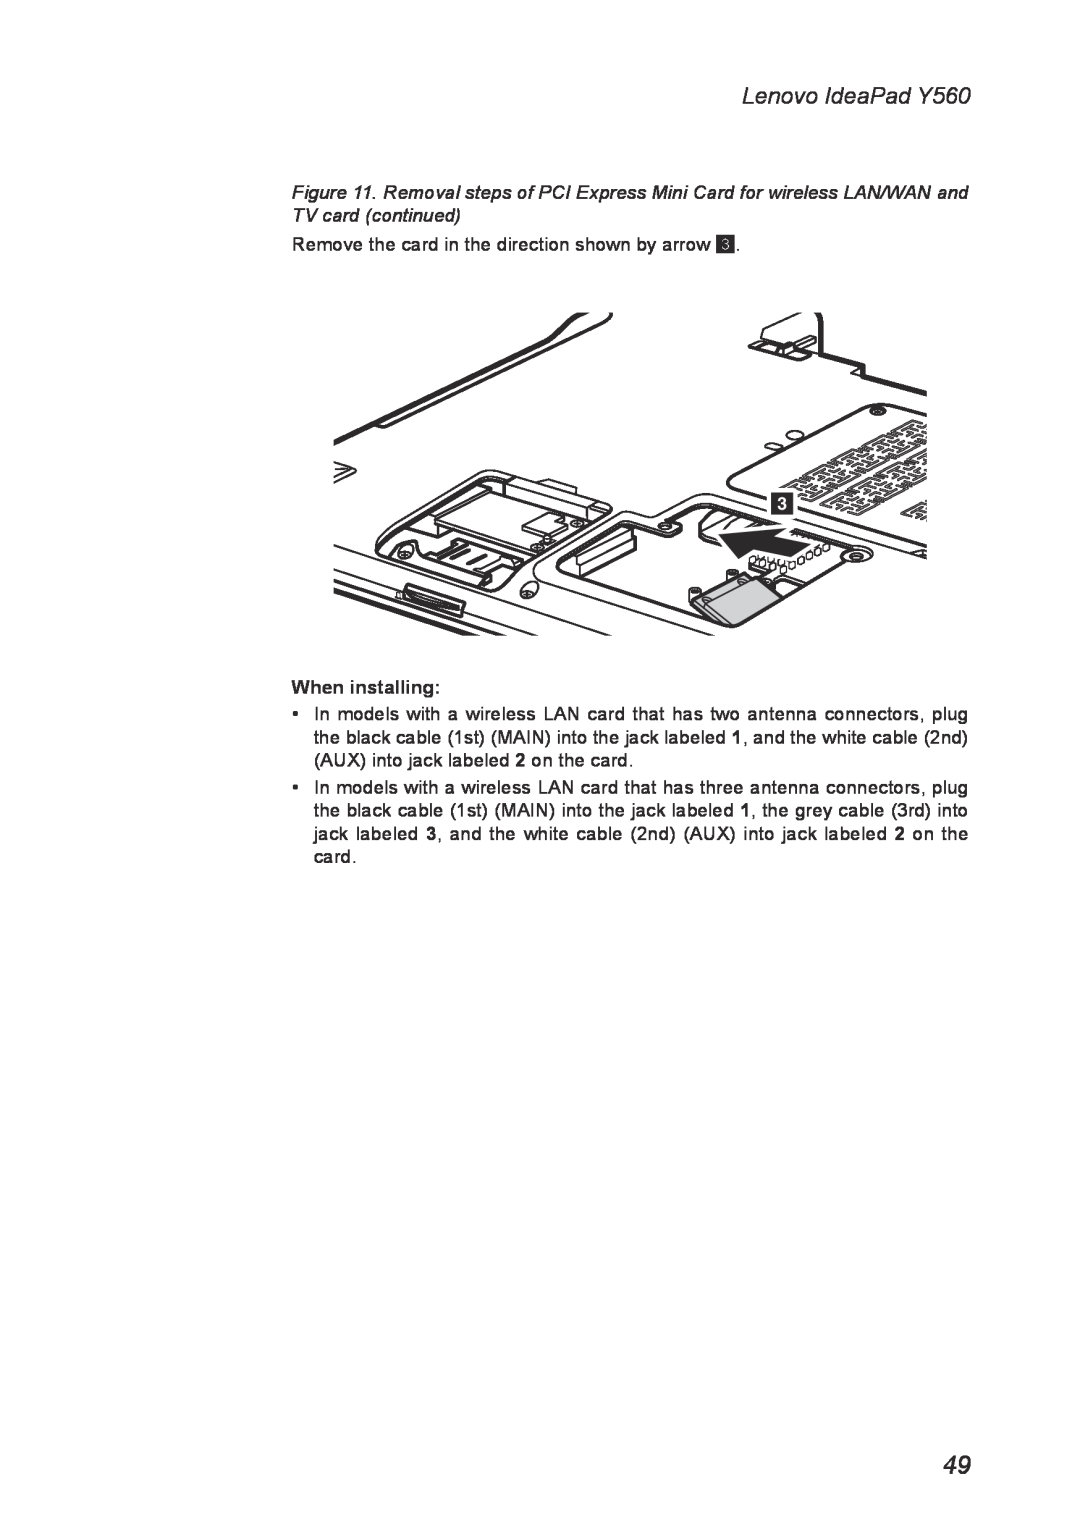 Lenovo manual Lenovo IdeaPad Y560, Remove the card in the direction shown by arrow, When installing 